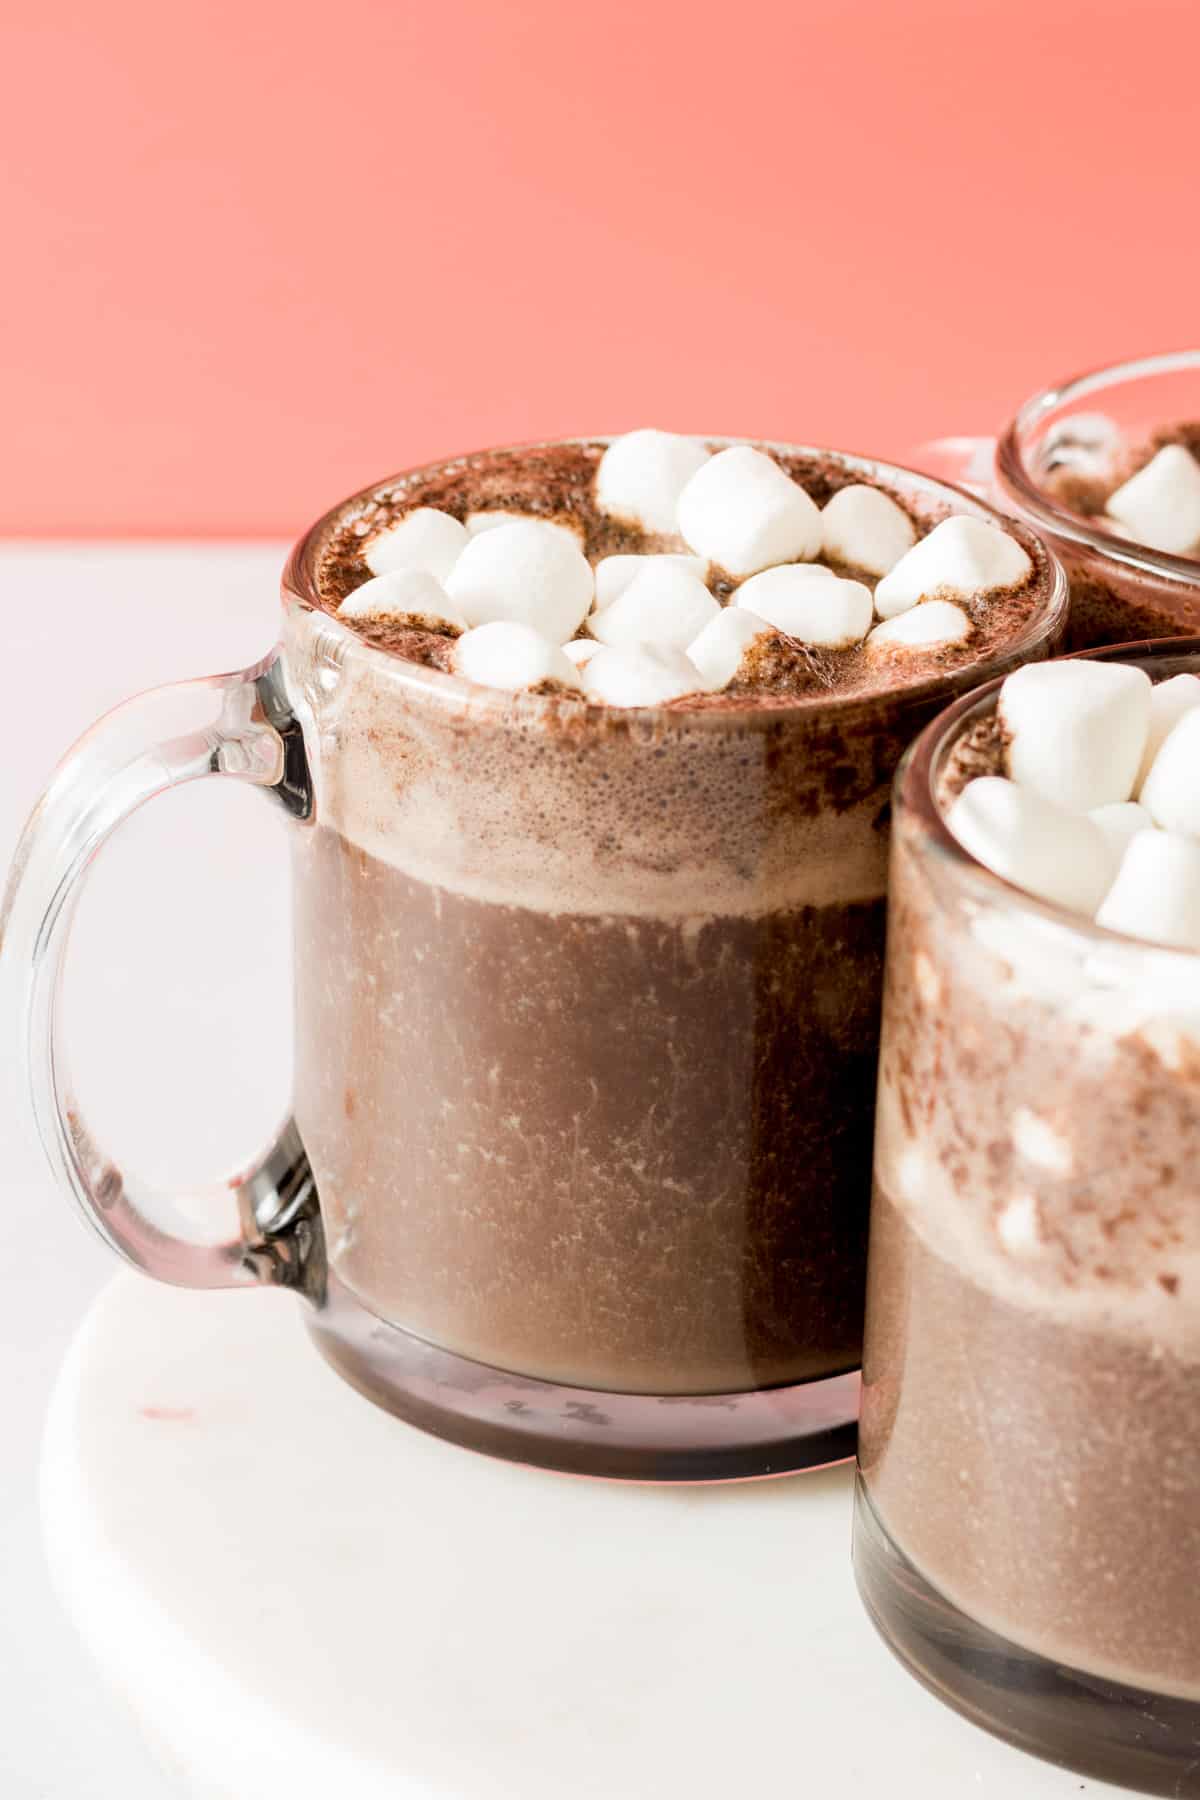 Hot chocolate topped with marshmallows.